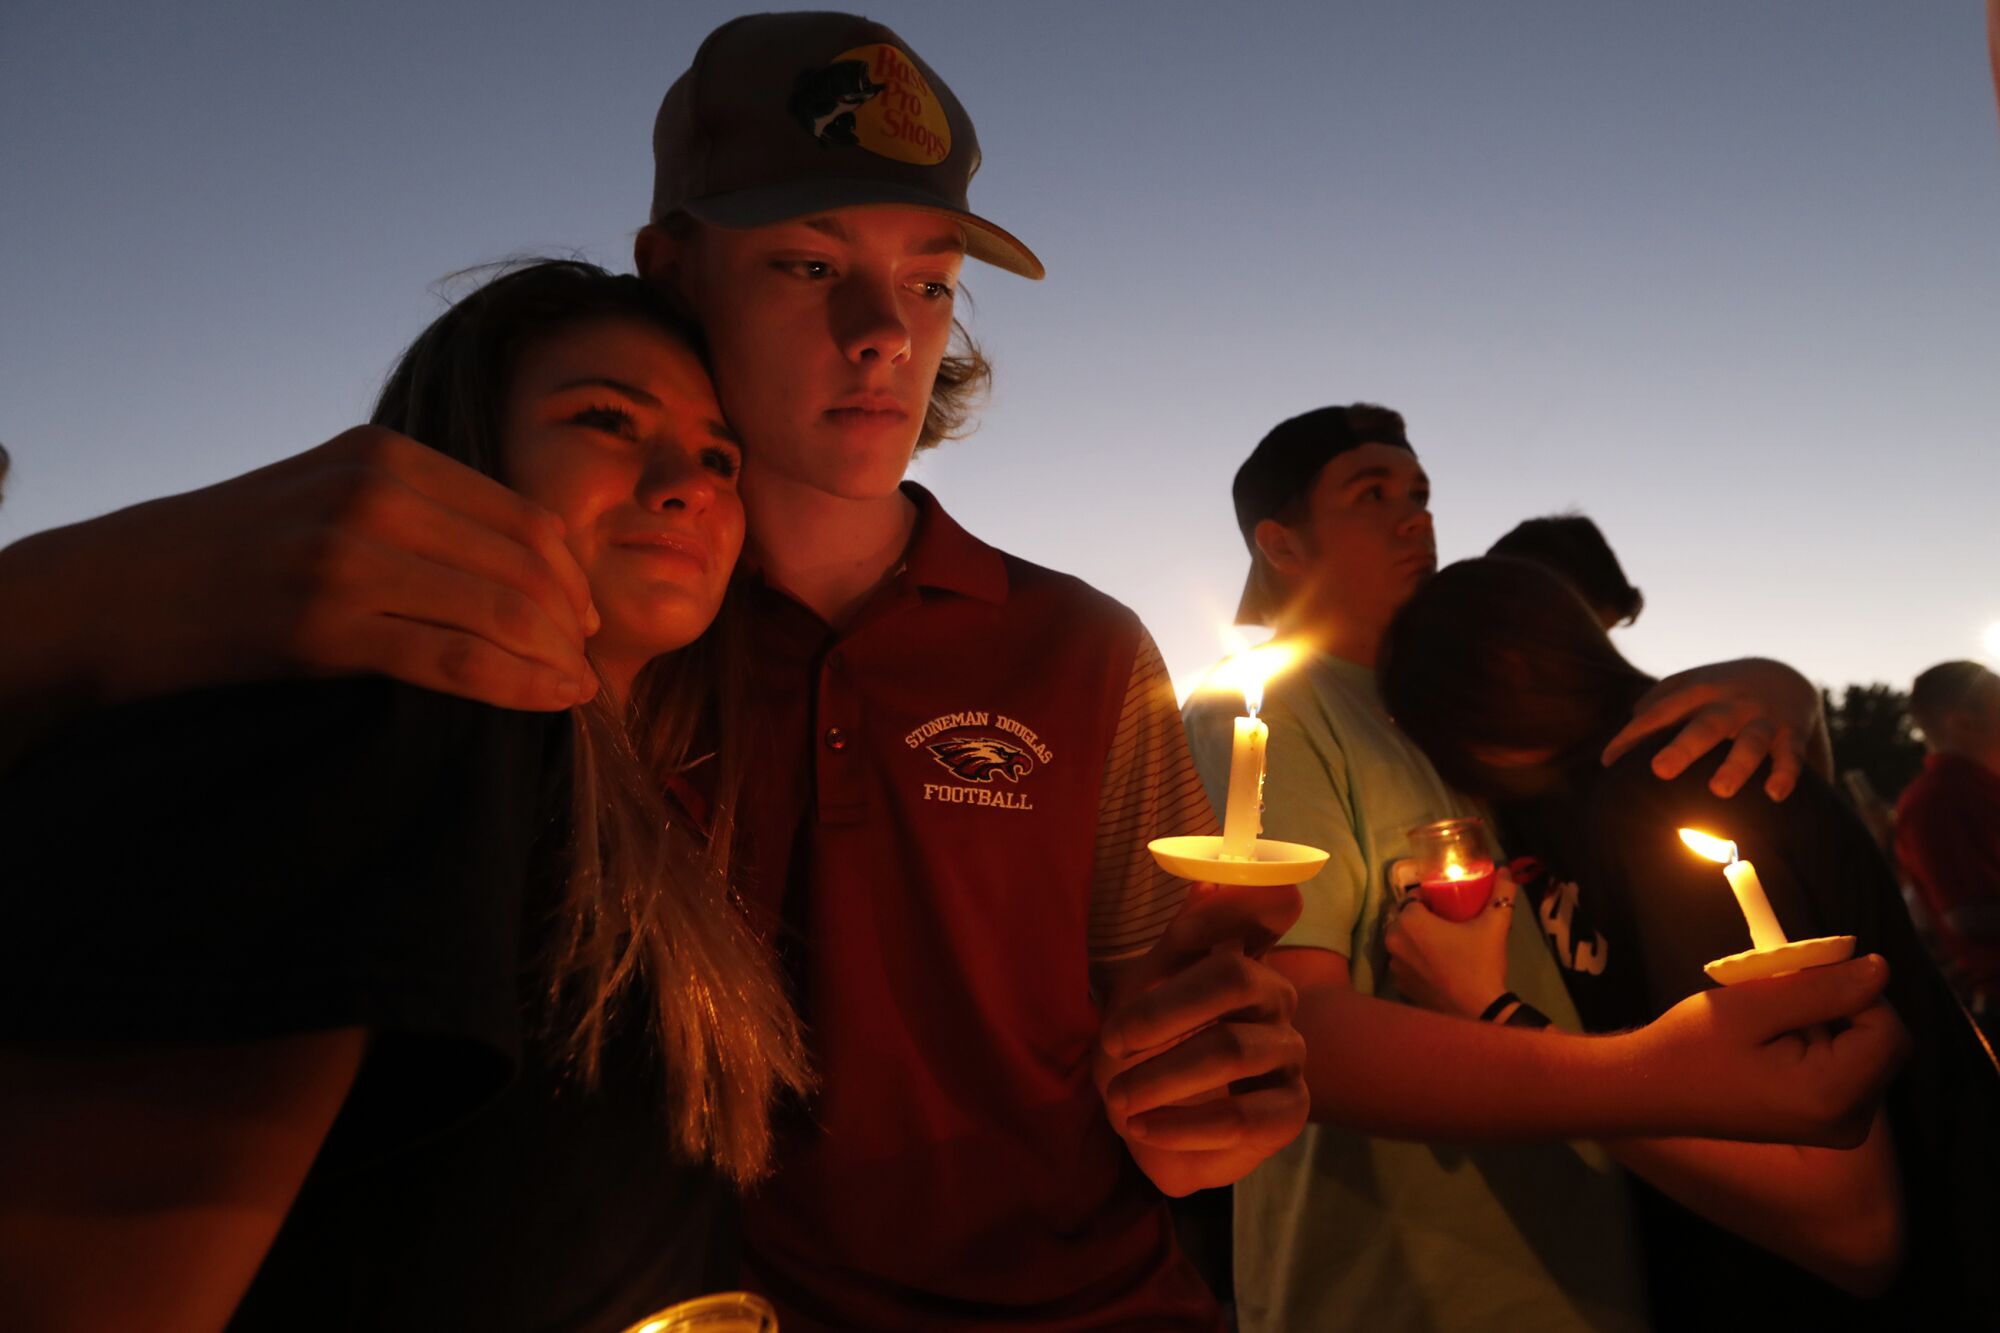 People embrace at a candlelight vigil.